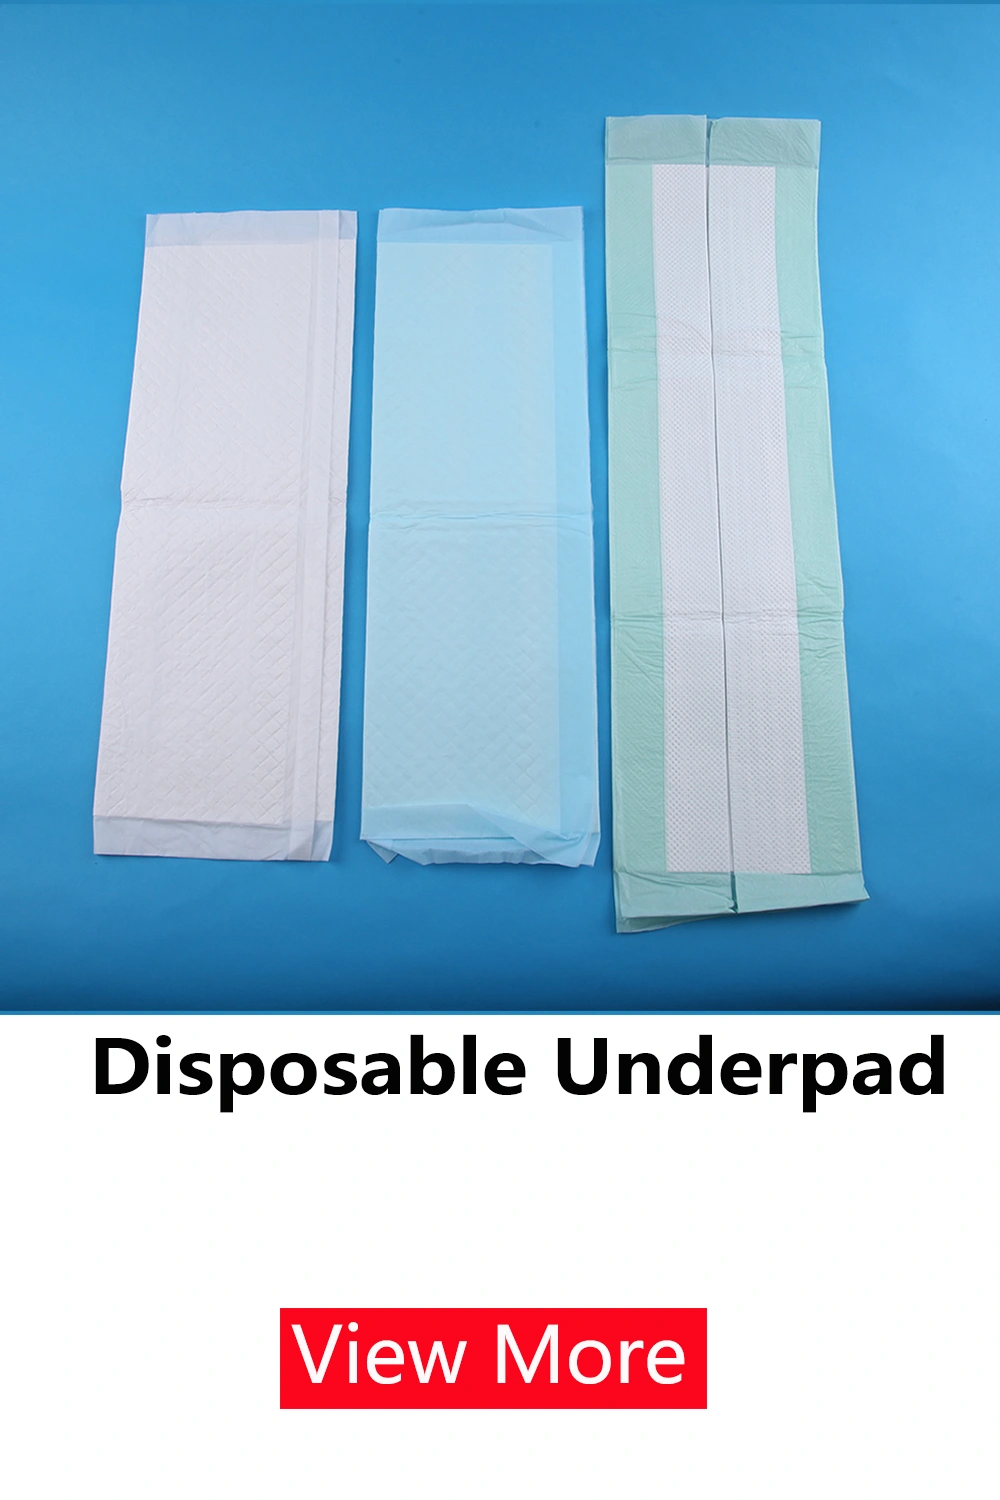 adult pull up related product disposable underpad picture